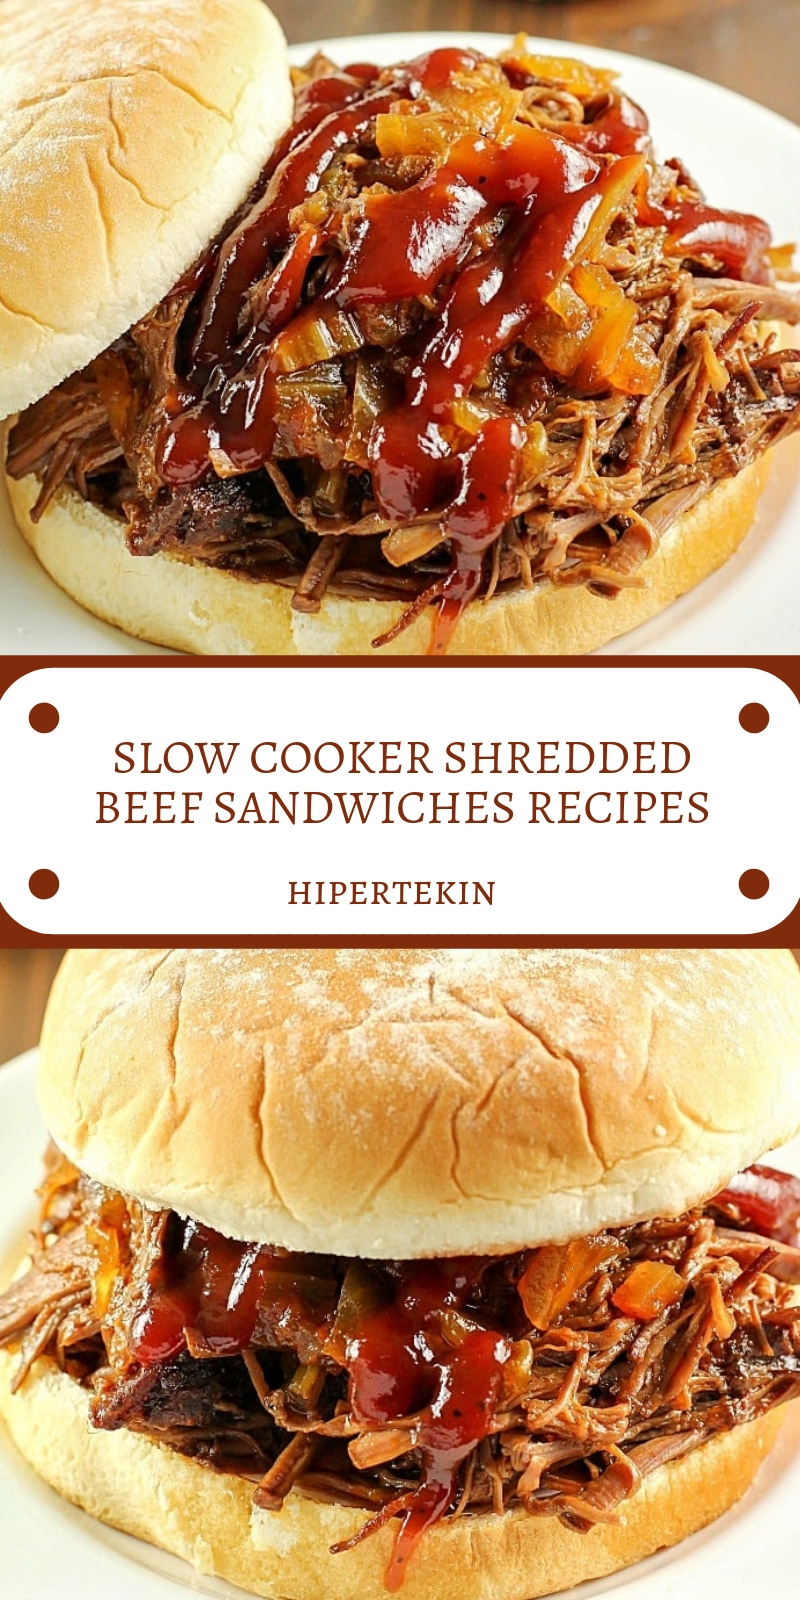 SLOW COOKER SHREDDED BEEF SANDWICHES RECIPES